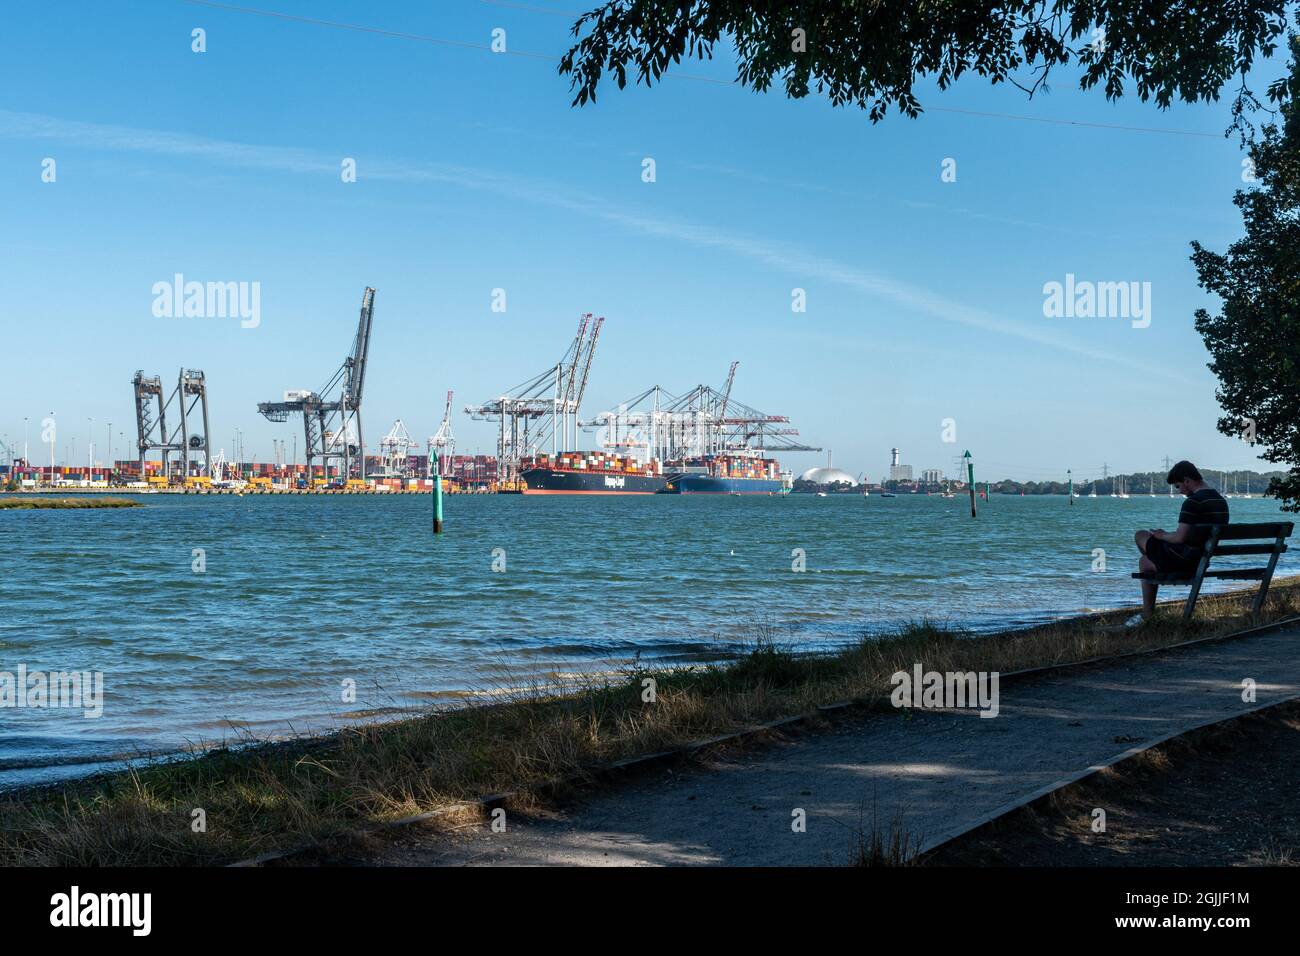 Port of Southampton (Southampton docks) in Hampshire, England, UK. View of the cargo port or container terminal from Goatee beach. Stock Photo